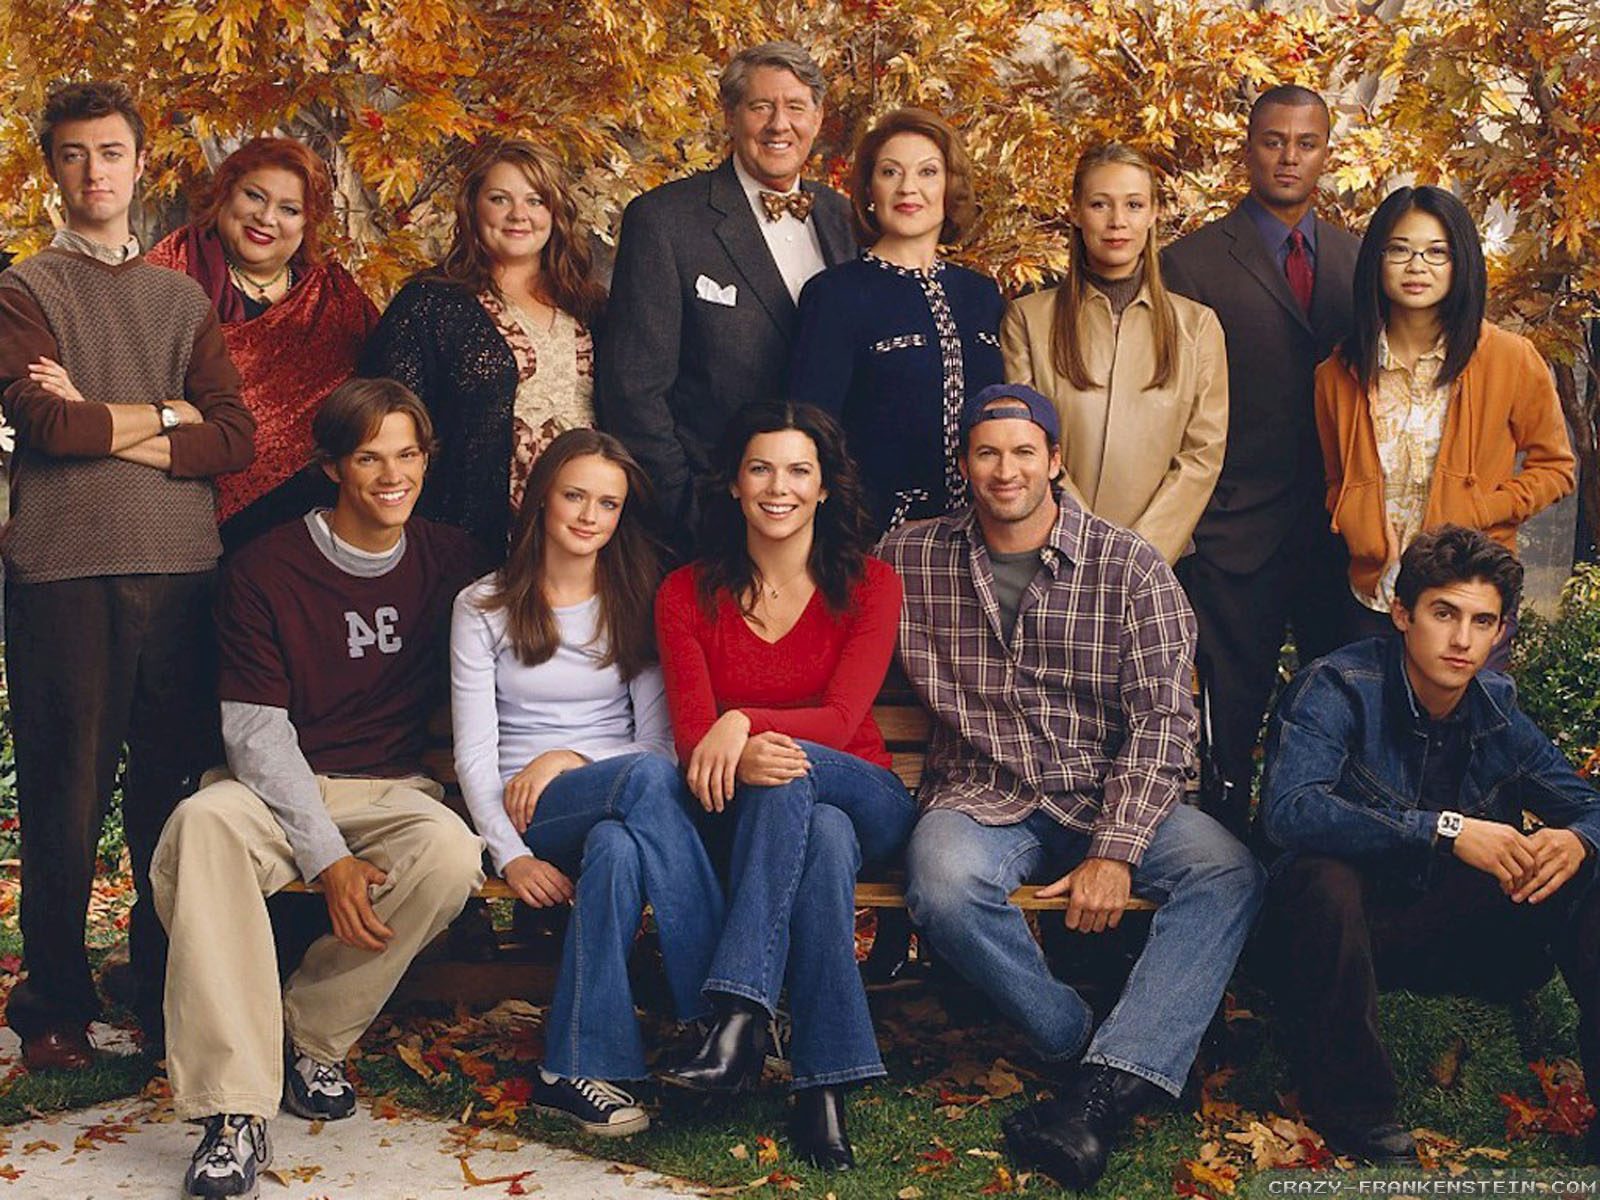 Gilmore girls revival, 'gilmore girls: a year in the life'